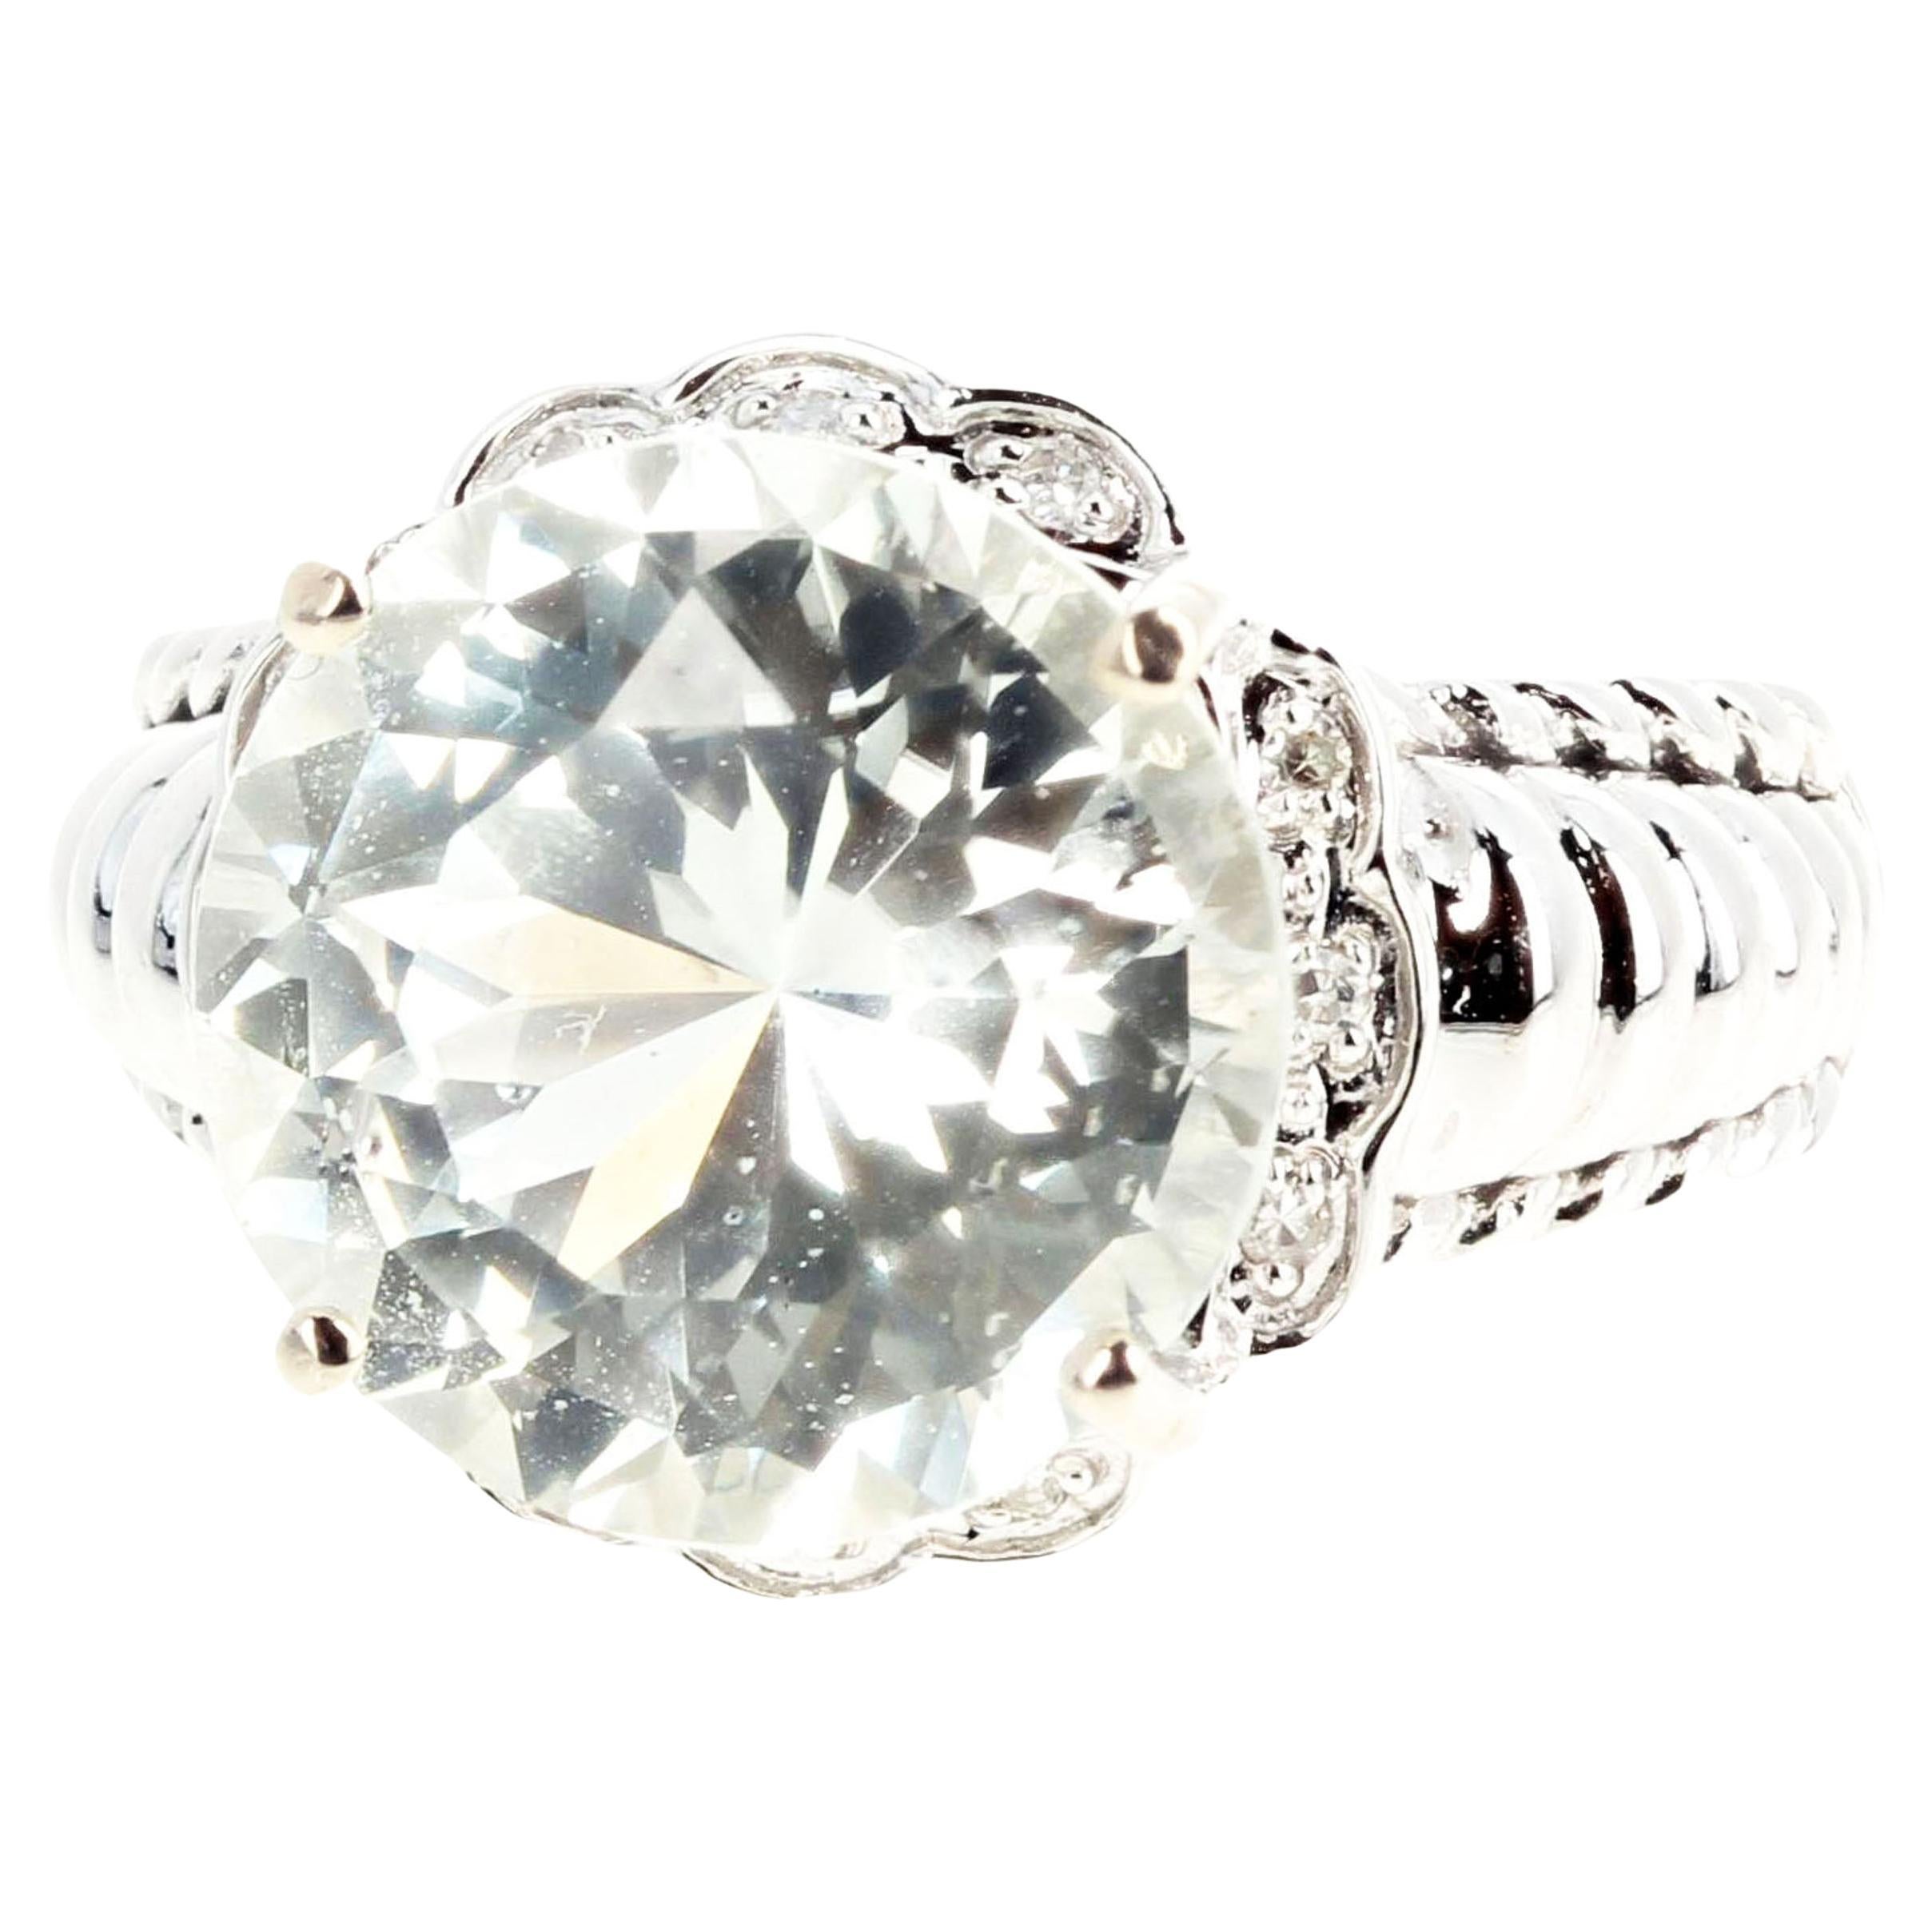 AJD HUGE Dazzling Magnificent 10 Carat White Sapphire & Diamonds White Gold Ring